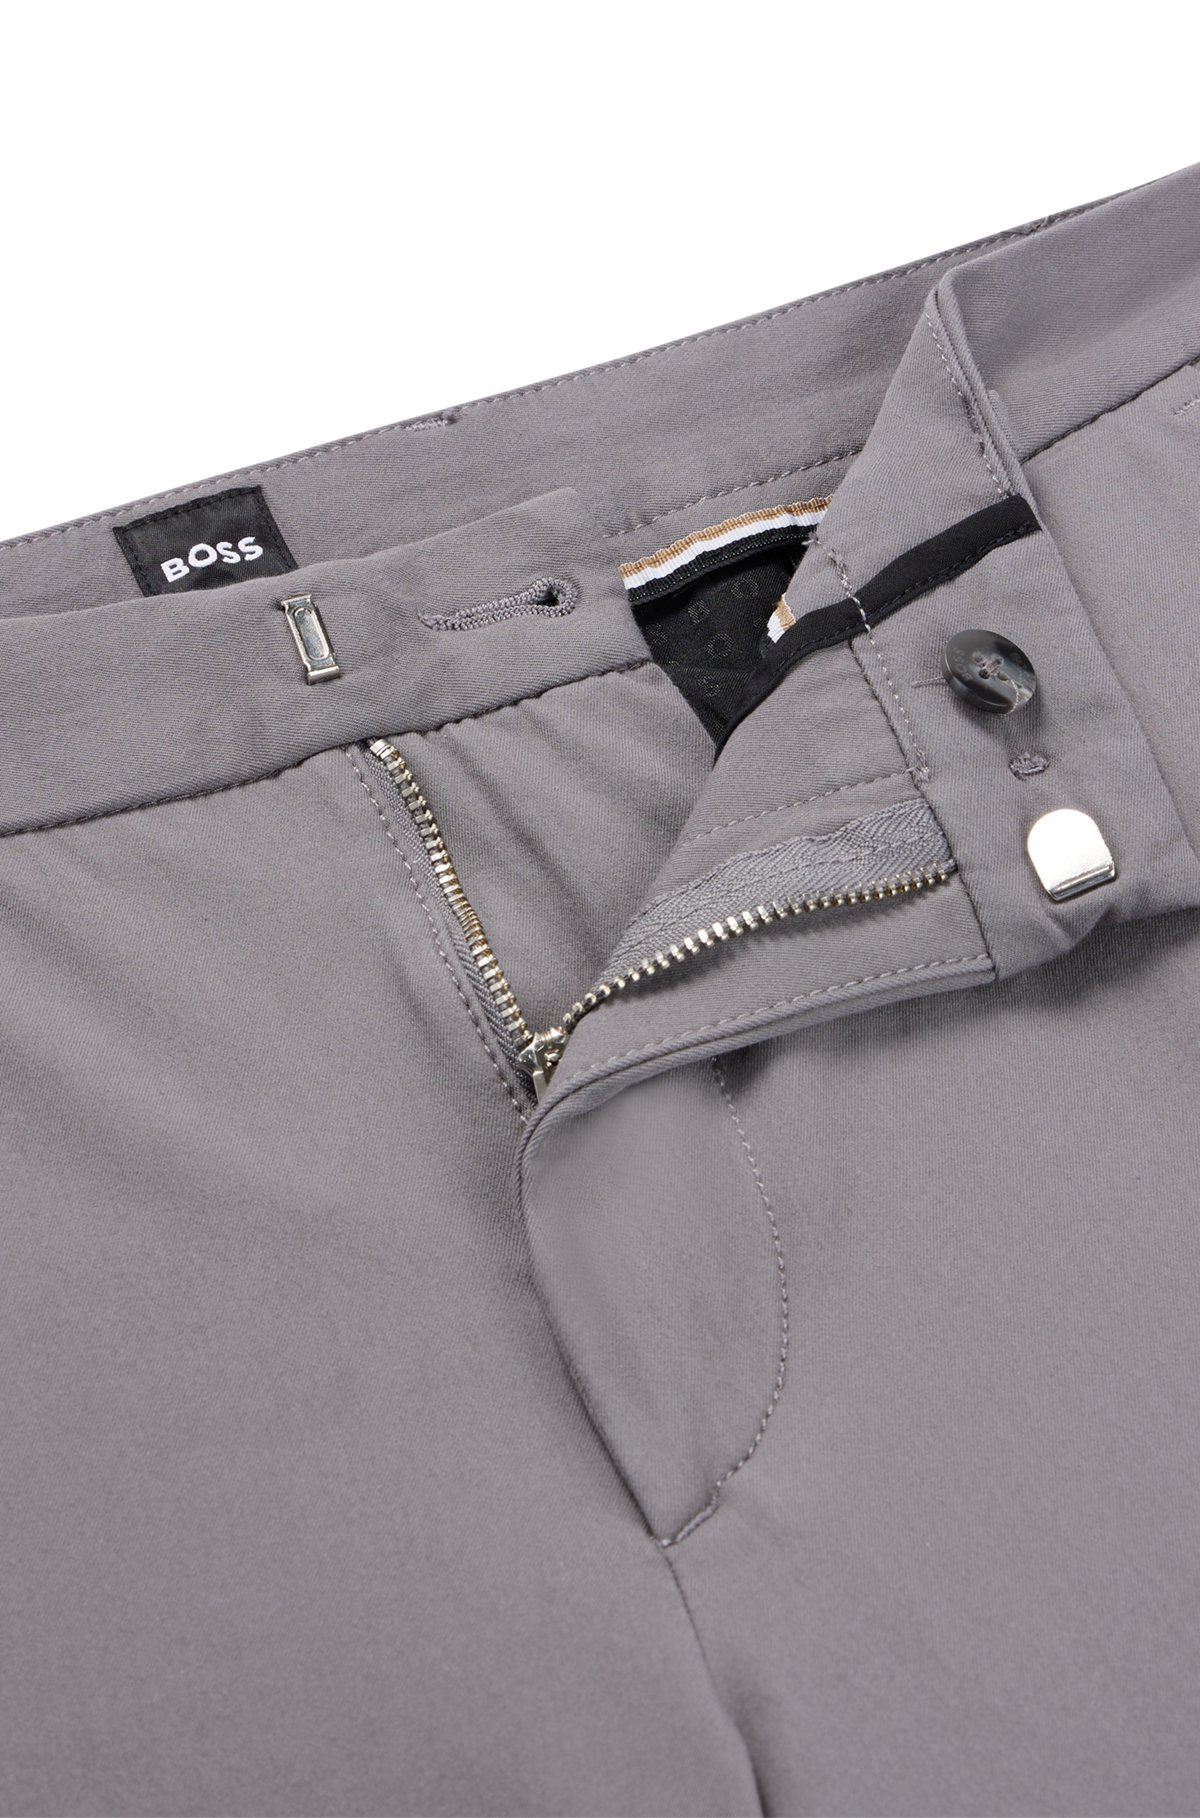 Slim-fit trousers in a cotton blend with stretch, Dark Grey